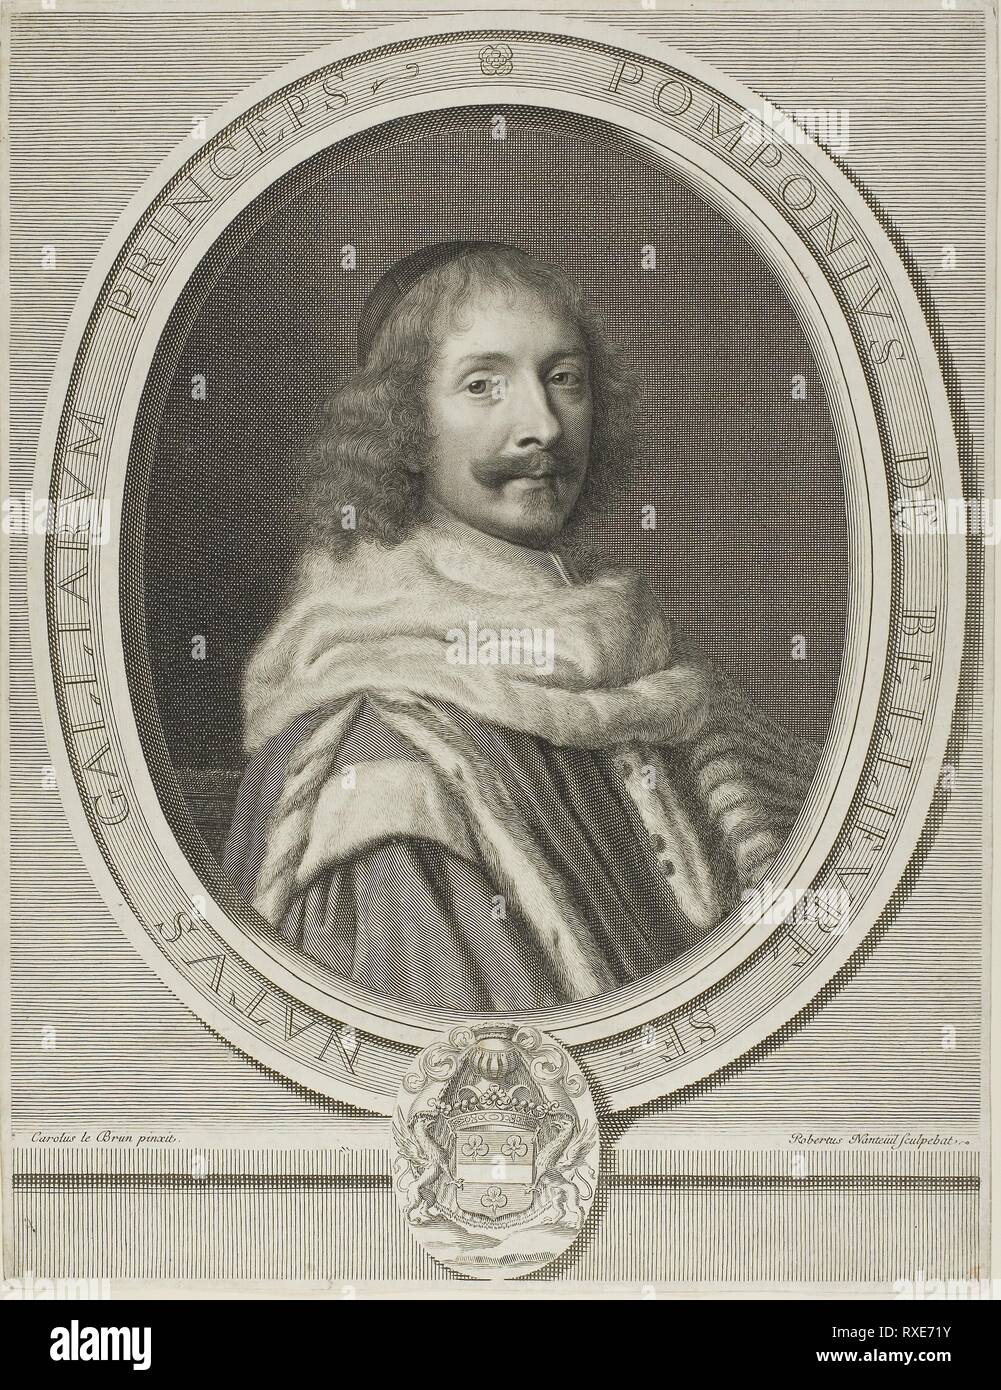 Pompone de Bellièvre. Robert Nanteuil (French, 1623-1678); after Charles Le Brun (French, 1619-1690). Date: 1657. Dimensions: 327 × 251 mm. Engraving on paper. Origin: France. Museum: The Chicago Art Institute. Stock Photo